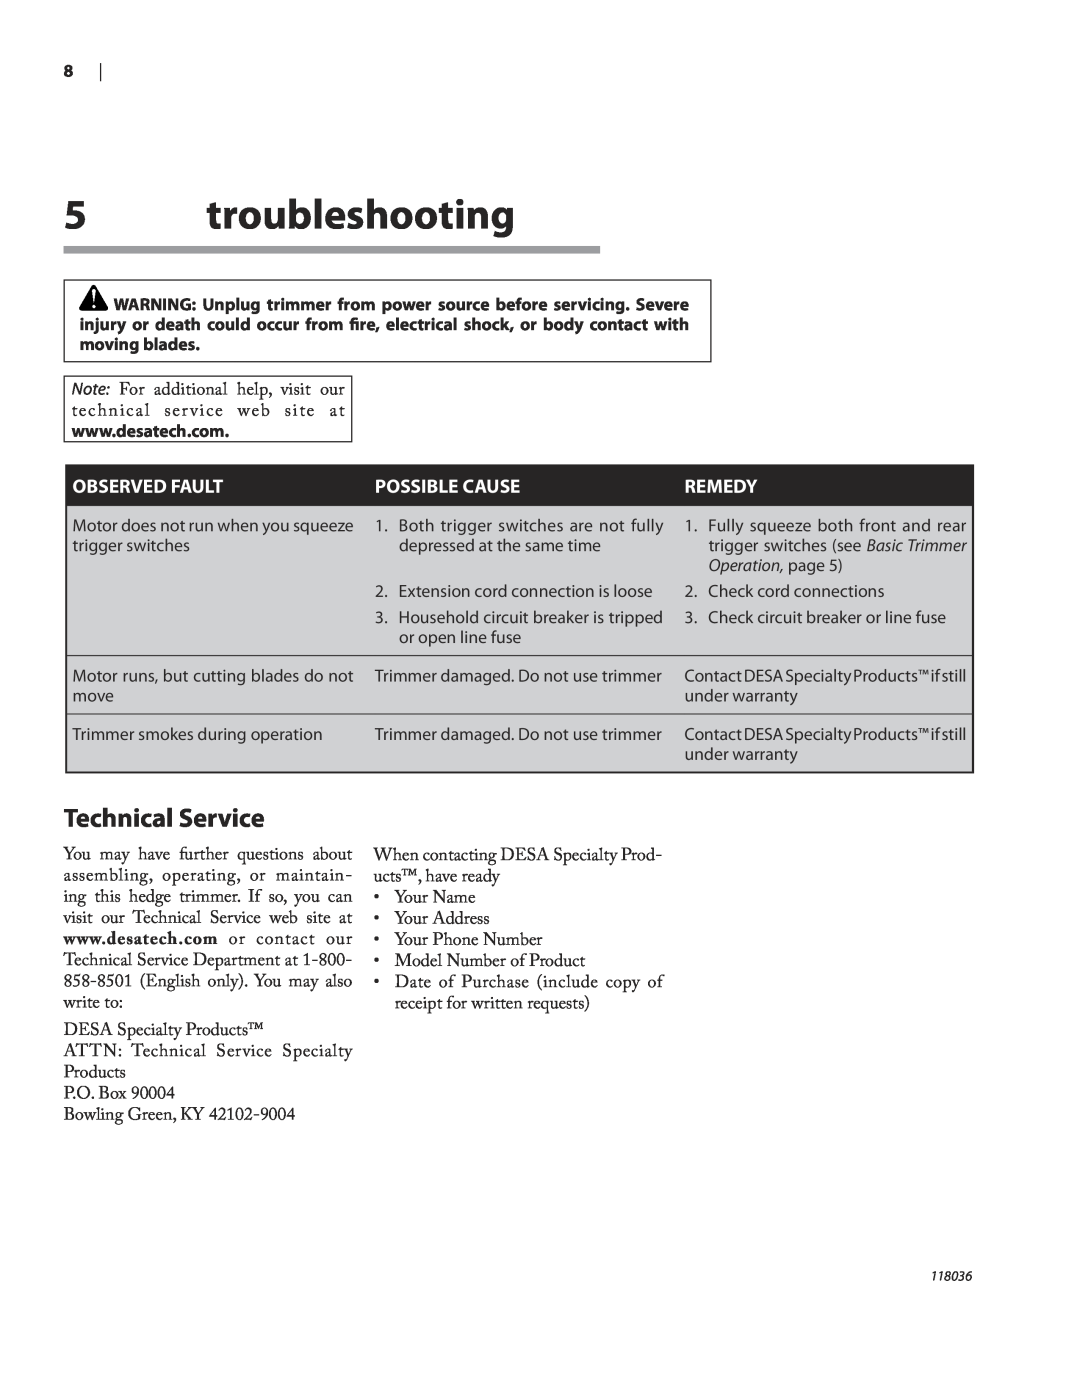 Remington HT3218A, HT4022A owner manual troubleshooting, Technical Service, Observed Fault, Possible Cause, Remedy 